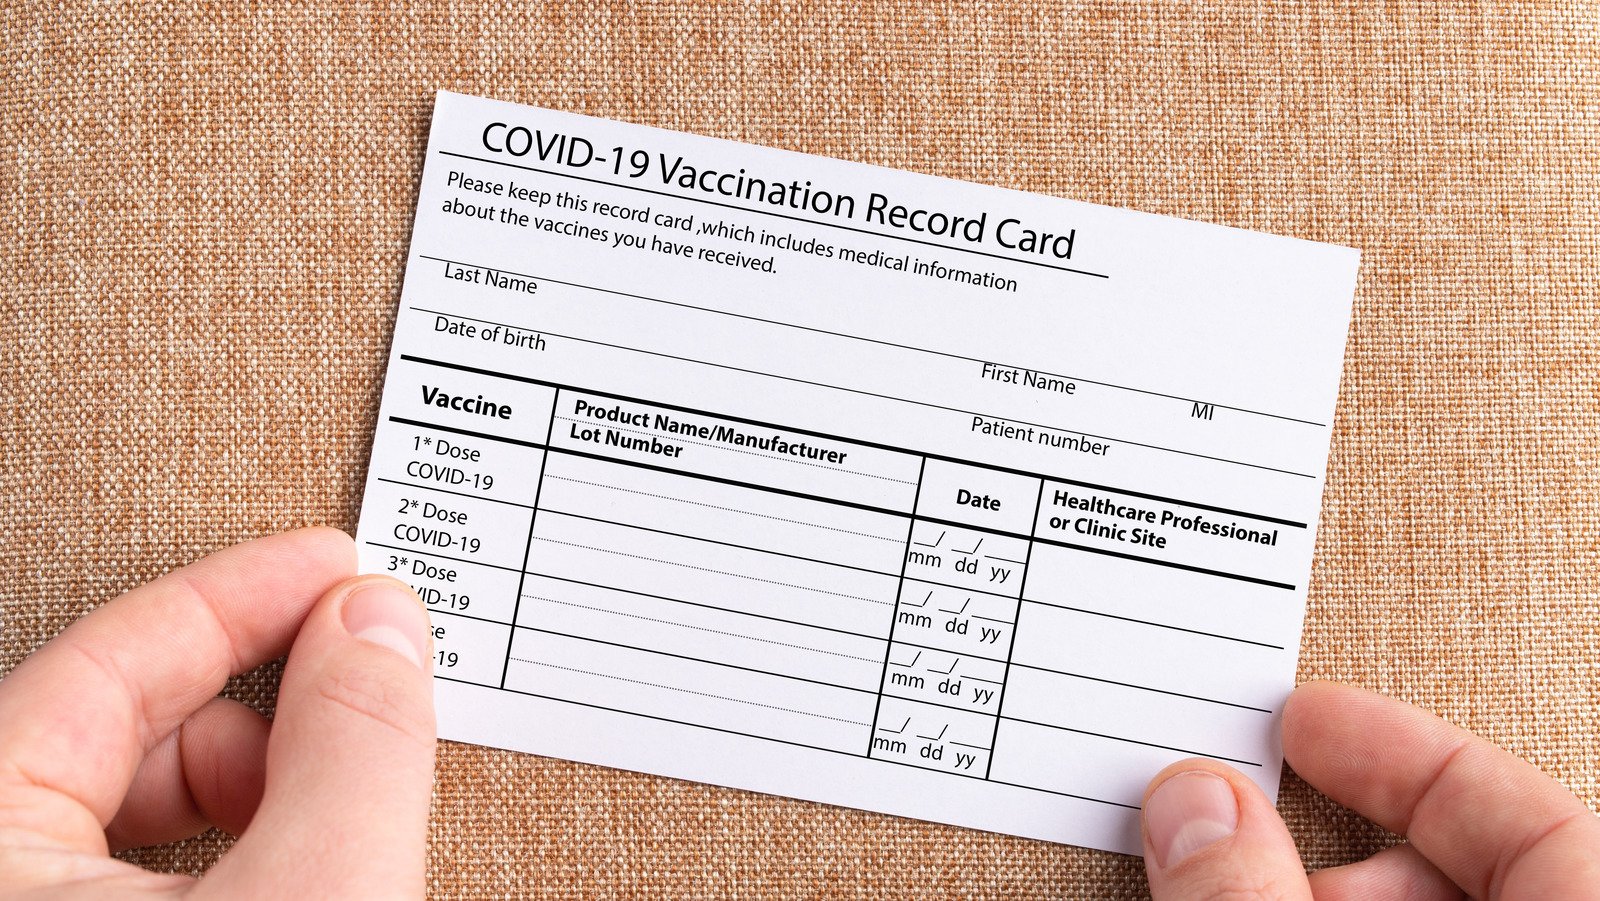 Don't Post A Photo Of Your Vaccine Card. Here's Why